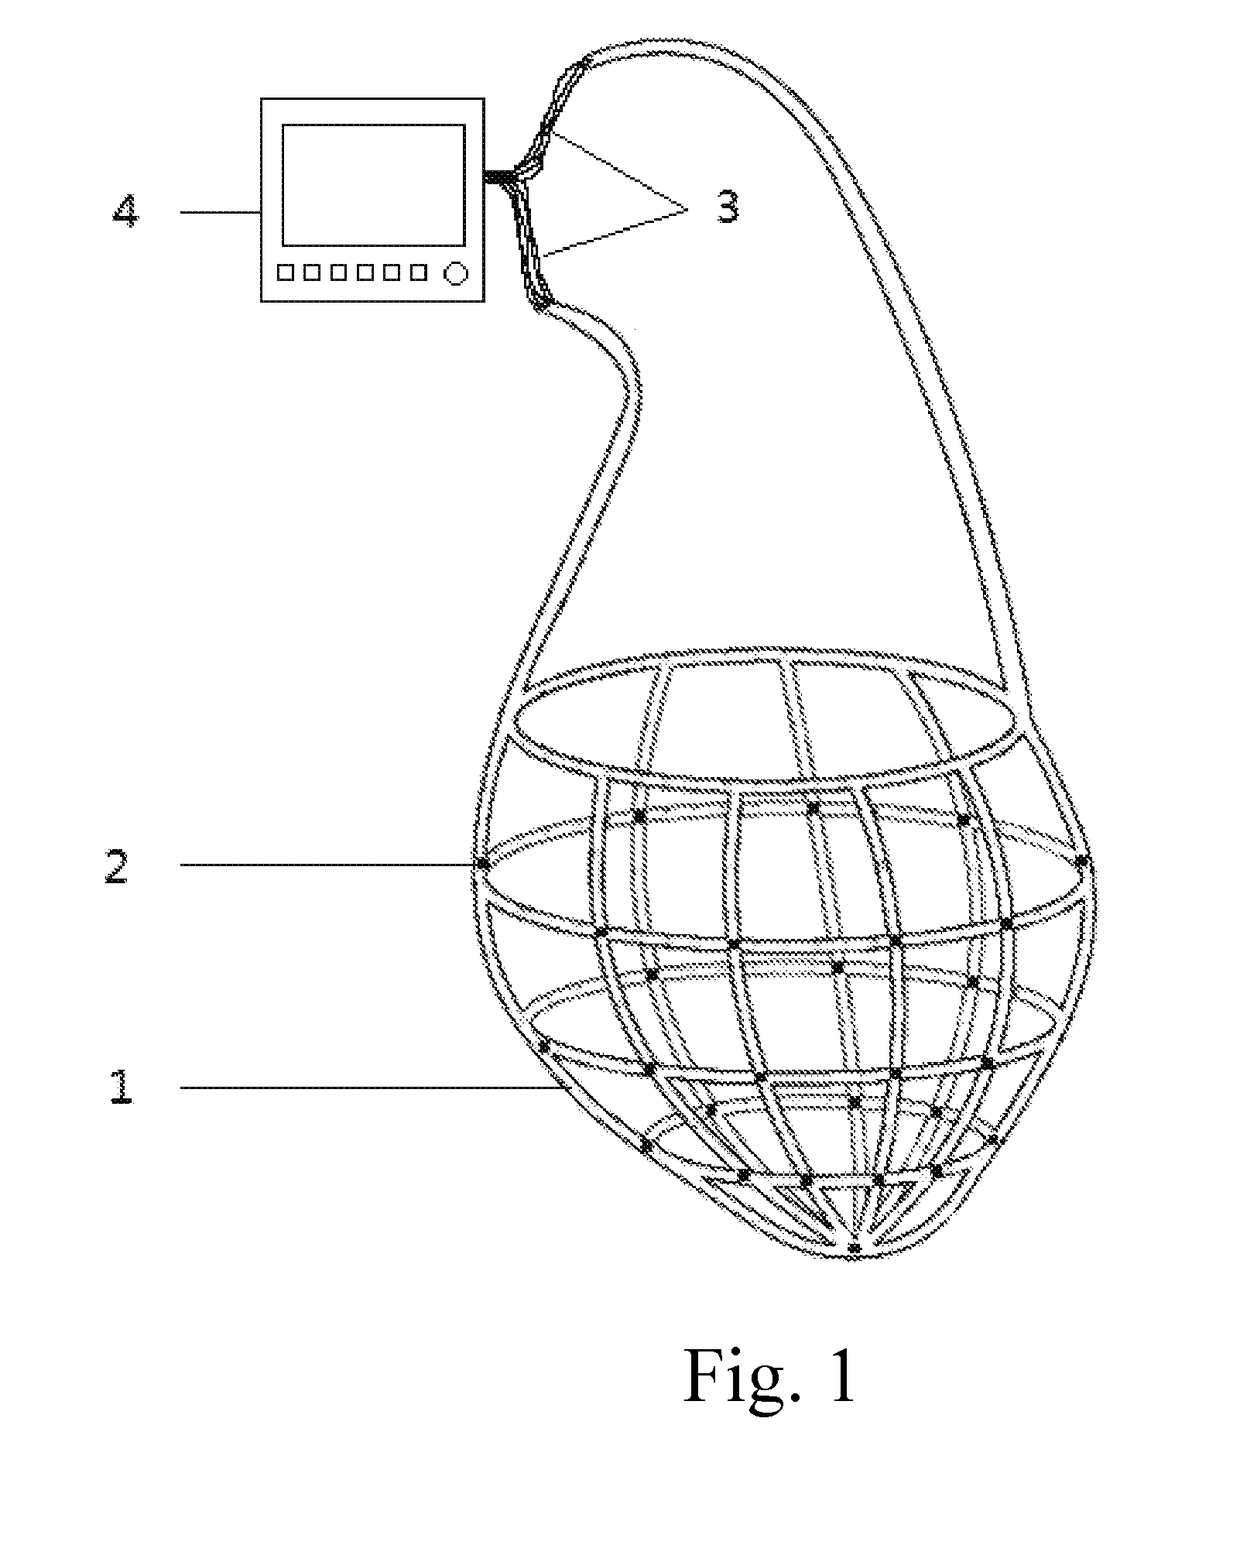 Cardiac function monitor and/or intervention system attached outside or inside of heart